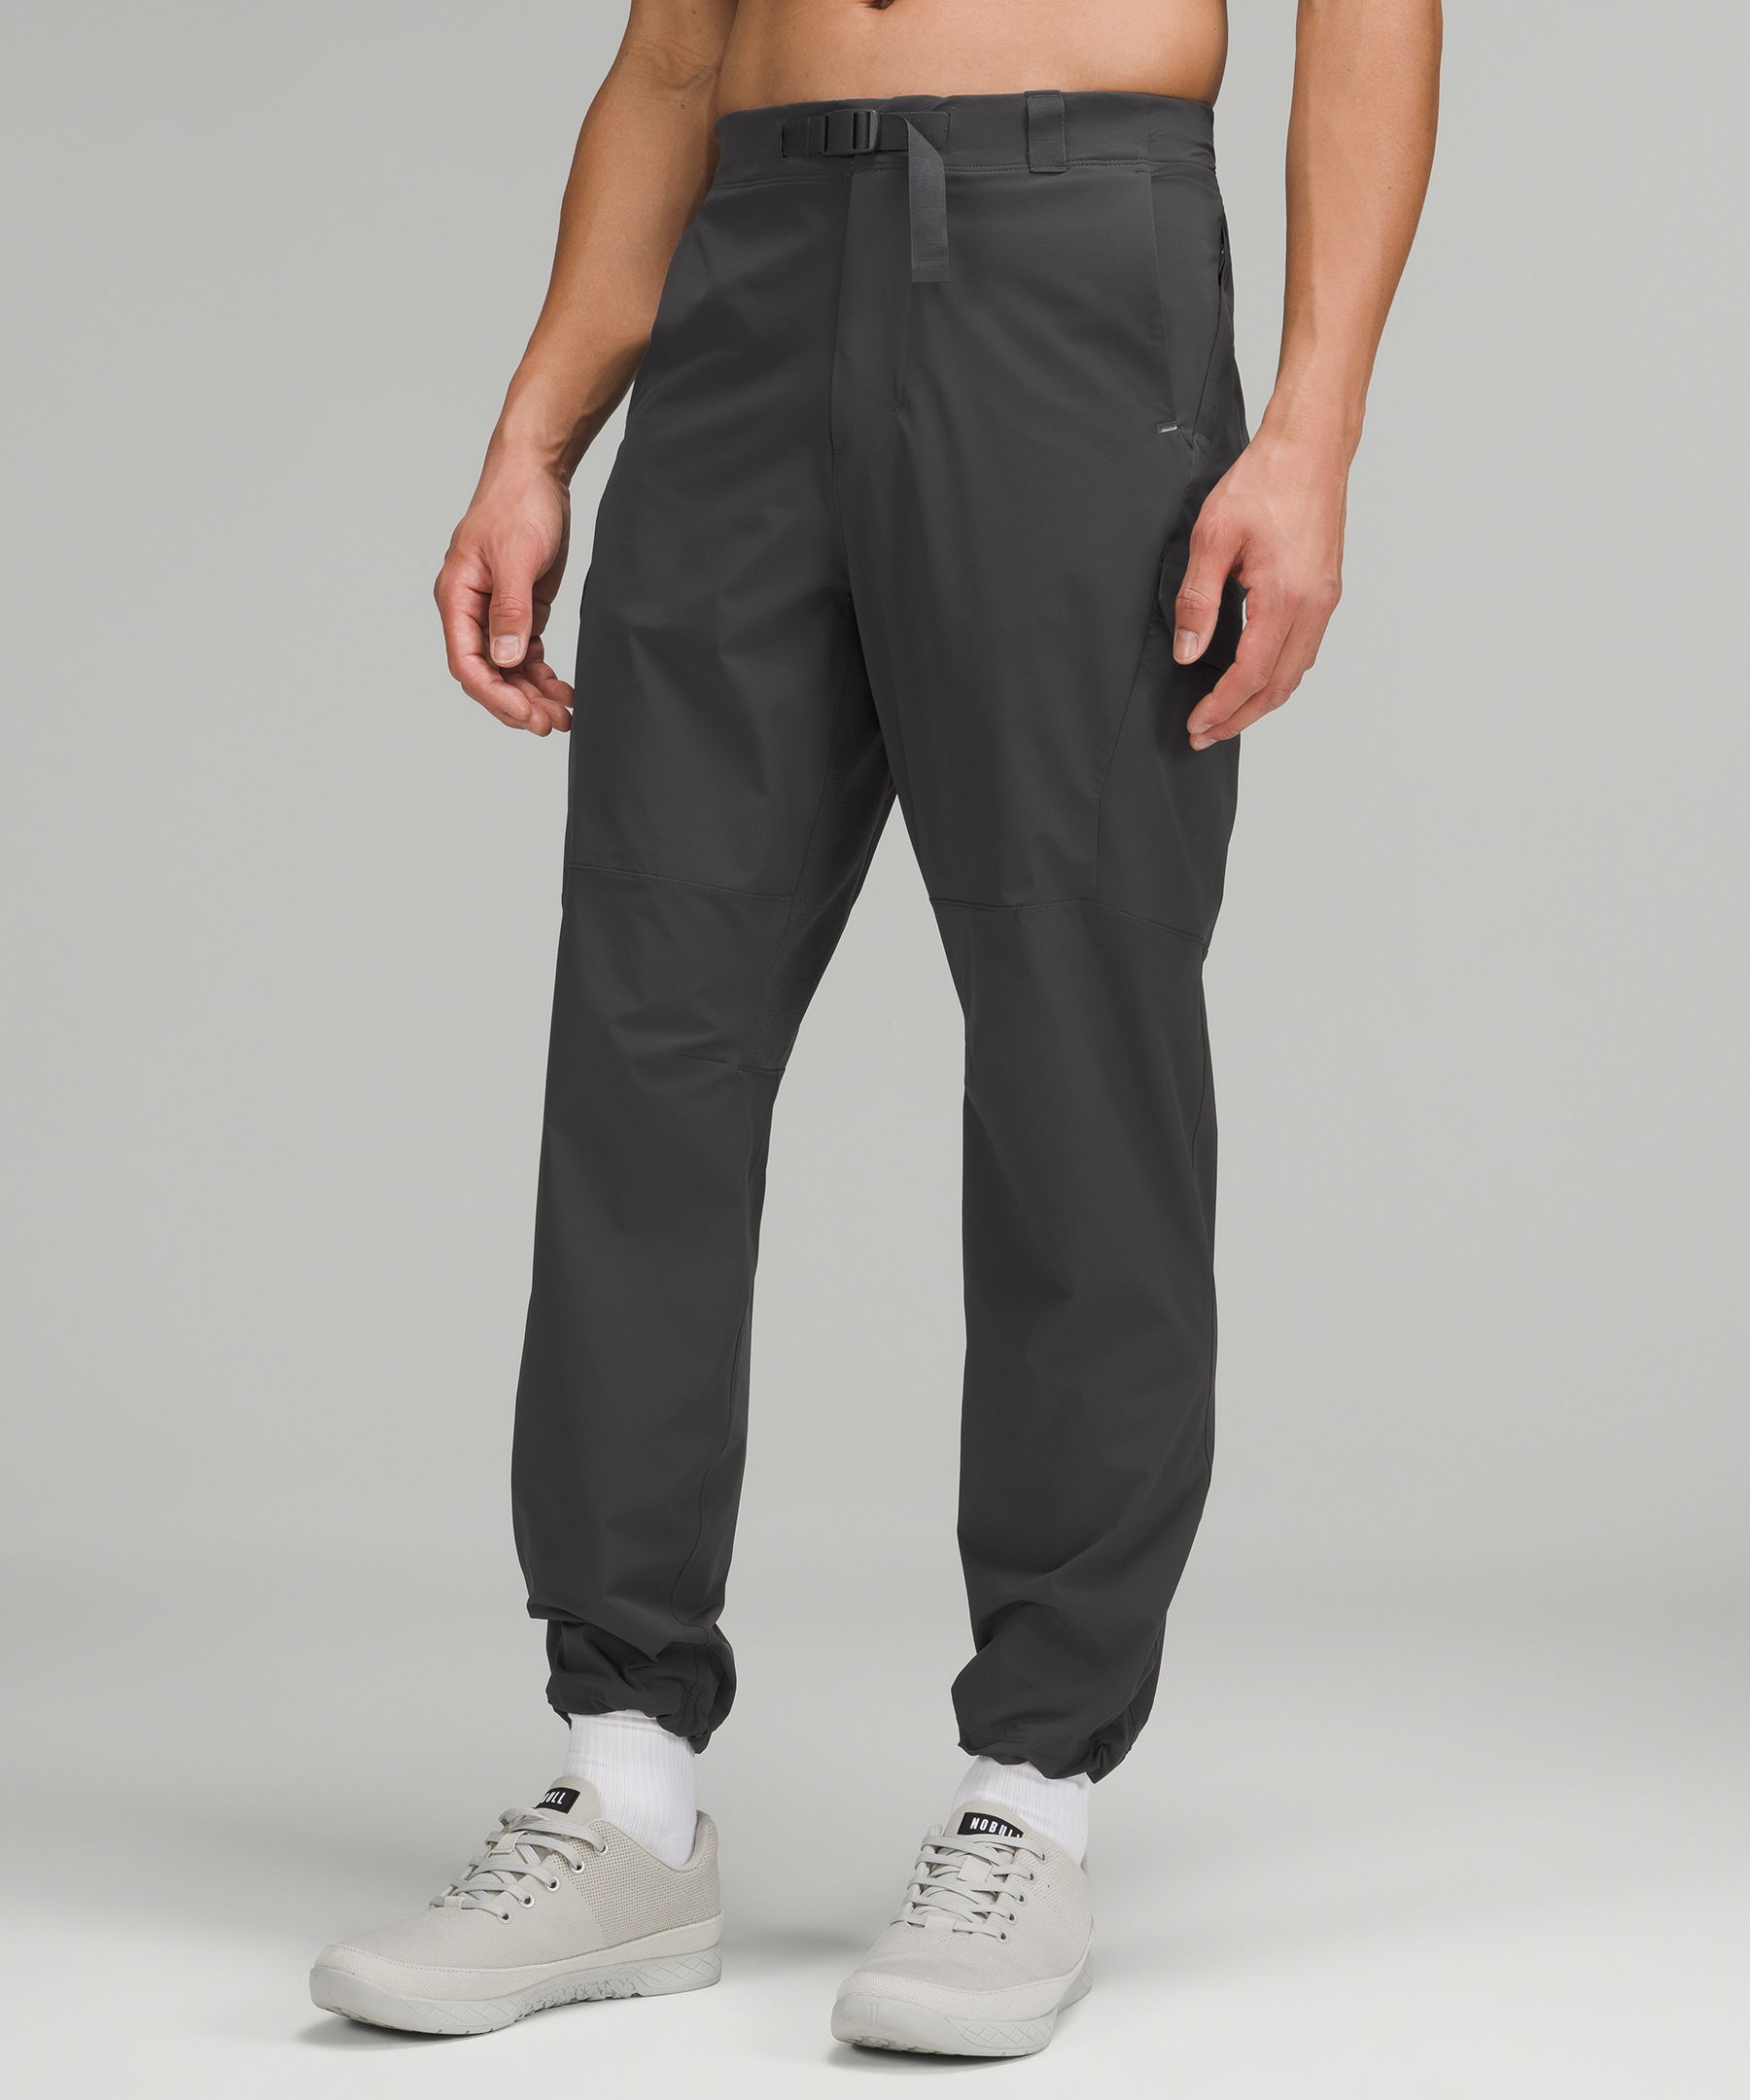 Outdoor Training Pant 29